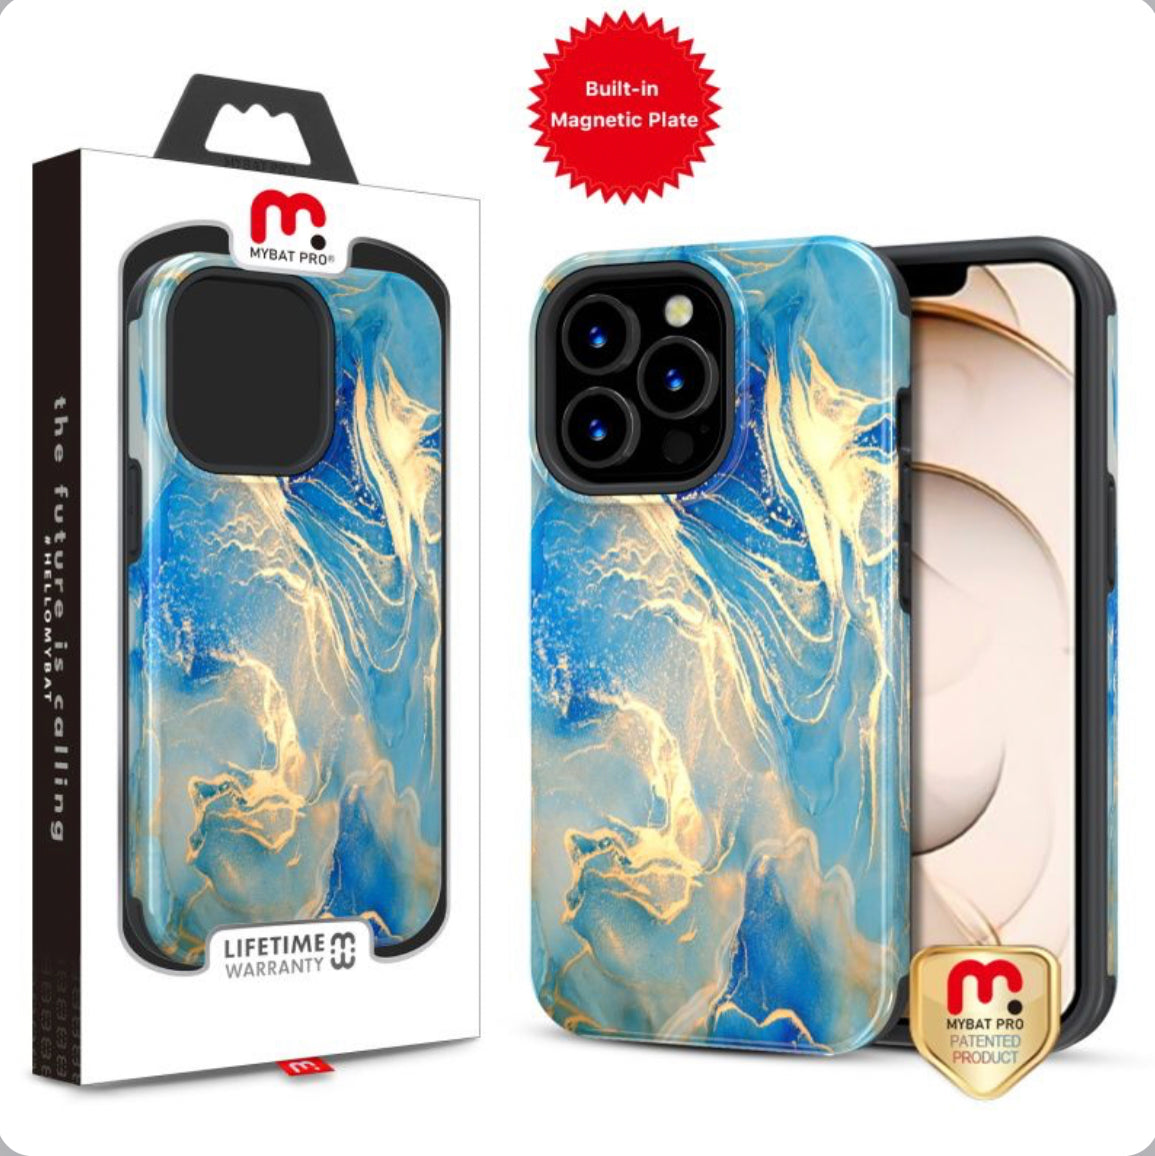 PRO FUSE MAGNETIC SERIES CASE FOR APPLE IPHONE 13 PRO MAX (6.7) - OCEAN MARBLE